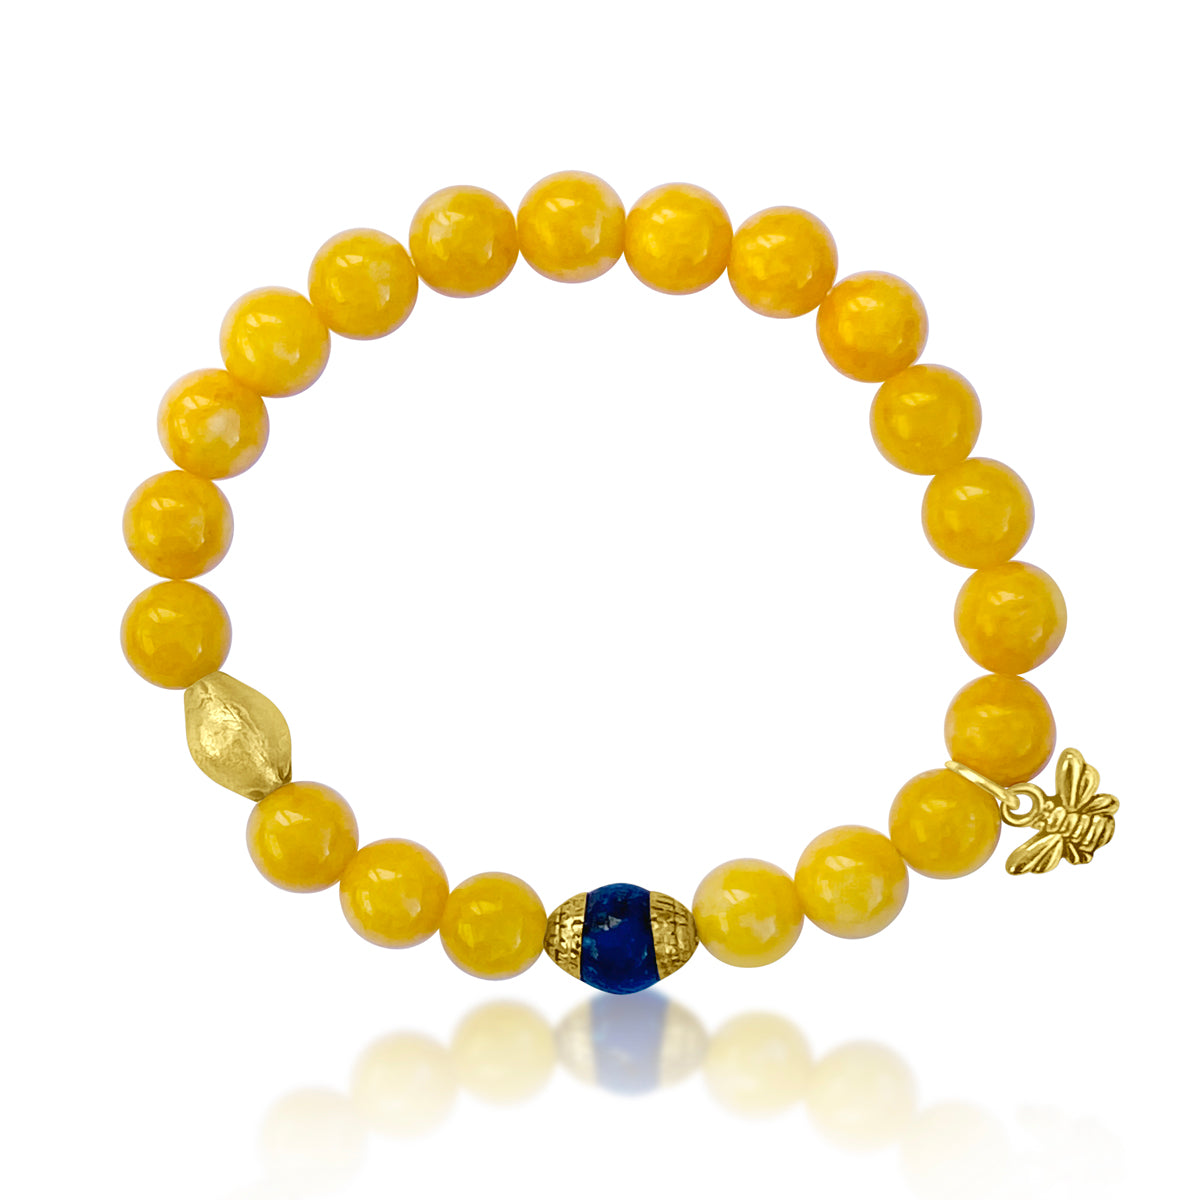 Bee Happy Honey Calcite Bracelet with Lapis Lazuli to Open Your Mind to All Possibilities. The bracelet is adorned with a playful bee charm to help you live happy.